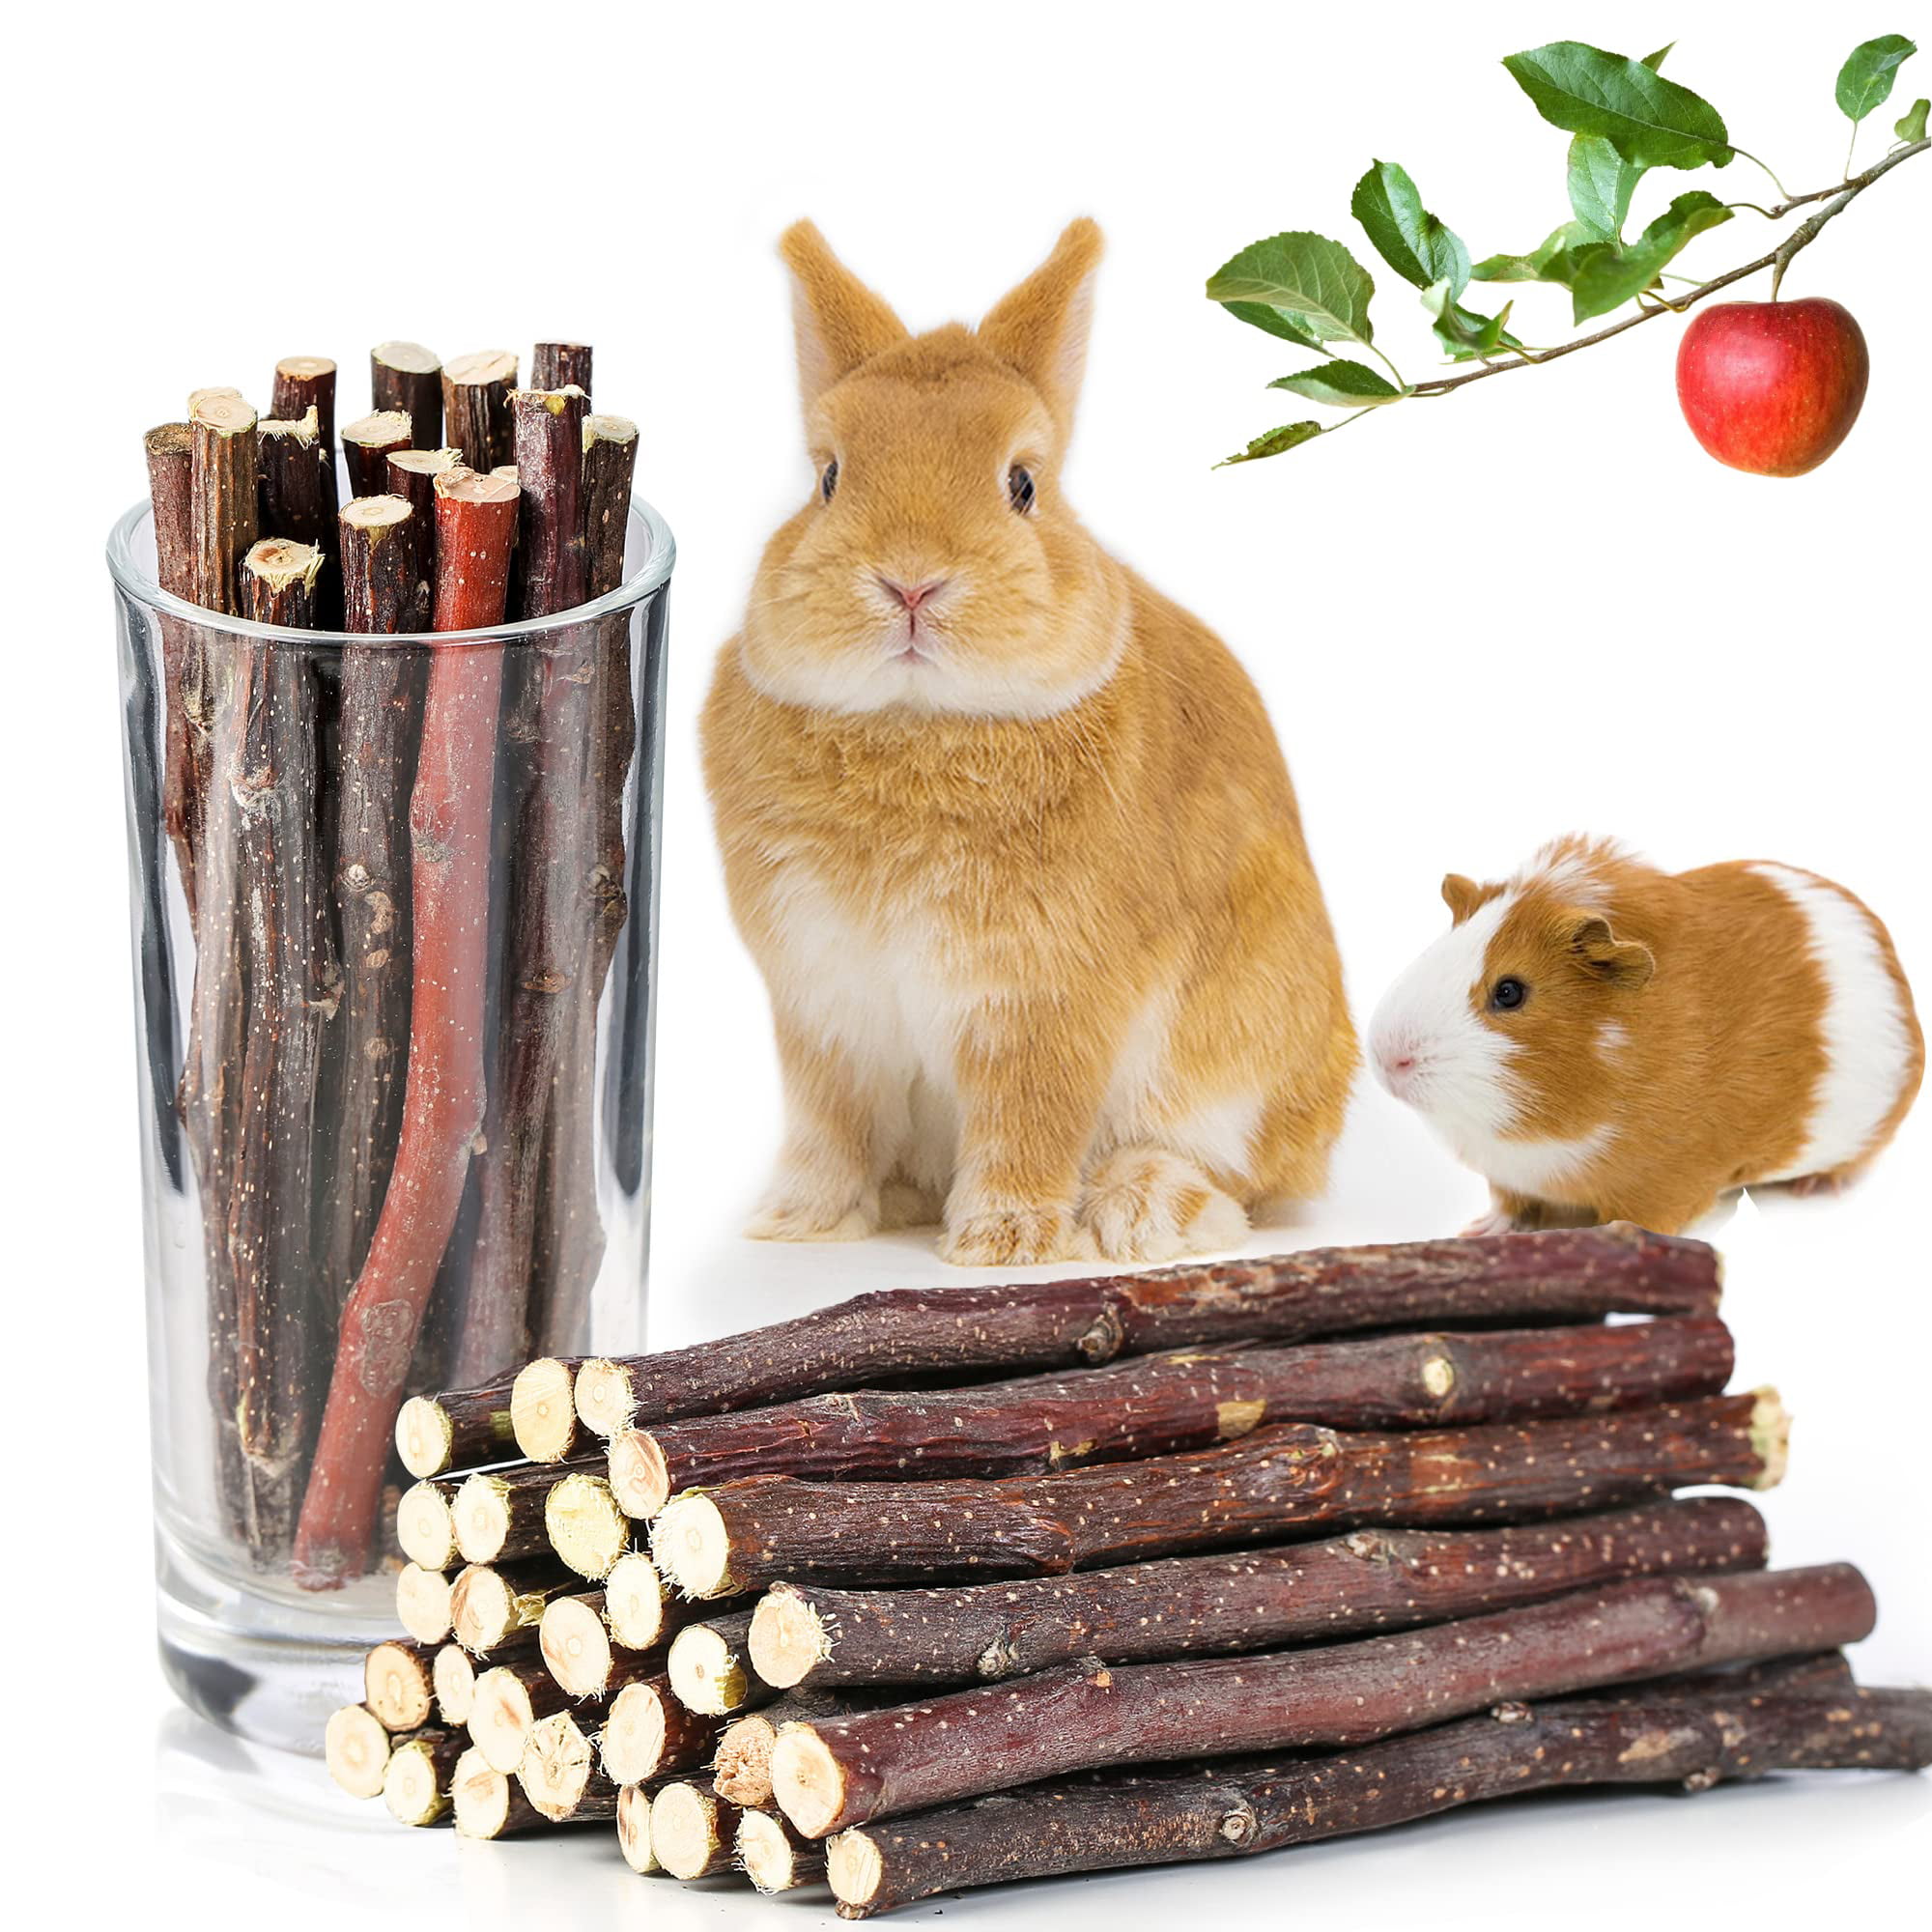 100g Wood Branch Chew Sticks Small Pet Snack Twigs for Hamster Rabbit Hot Sale 